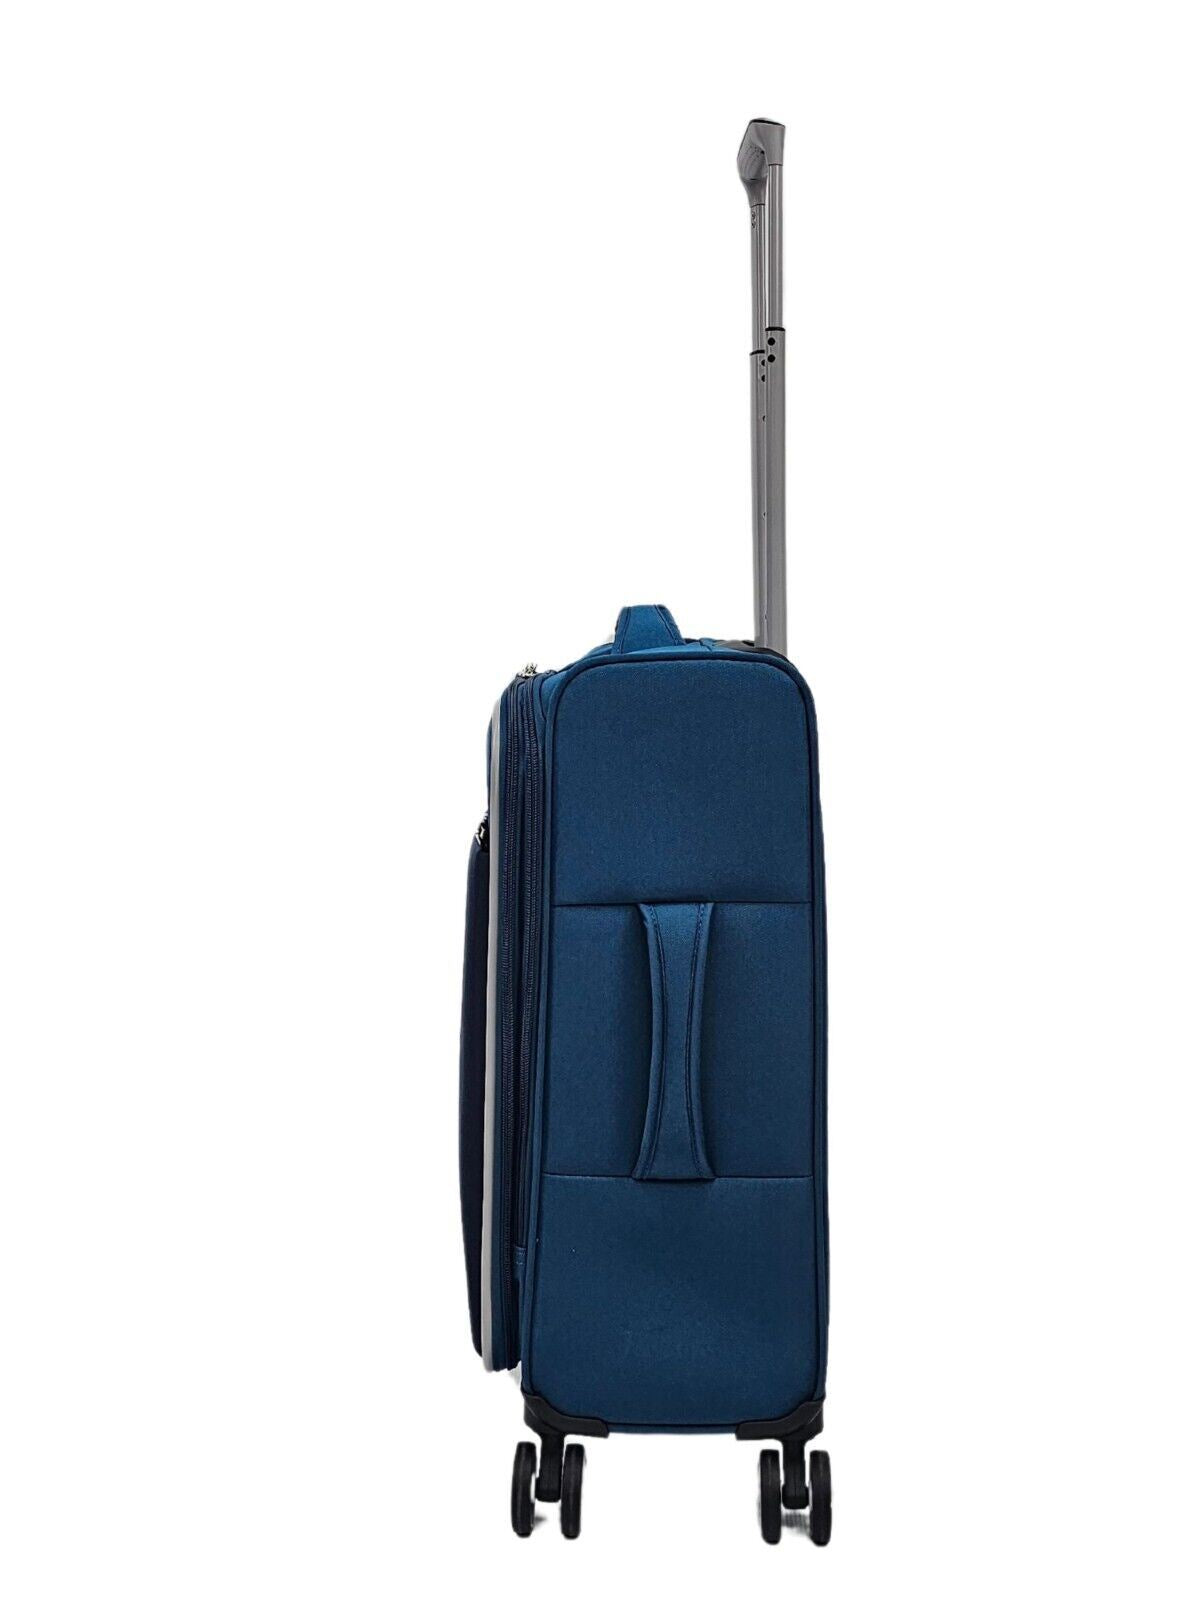 Lightweight Teal blue Cabin Suitcases 4 Wheel Luggage Travel Bag - Upperclass Fashions 